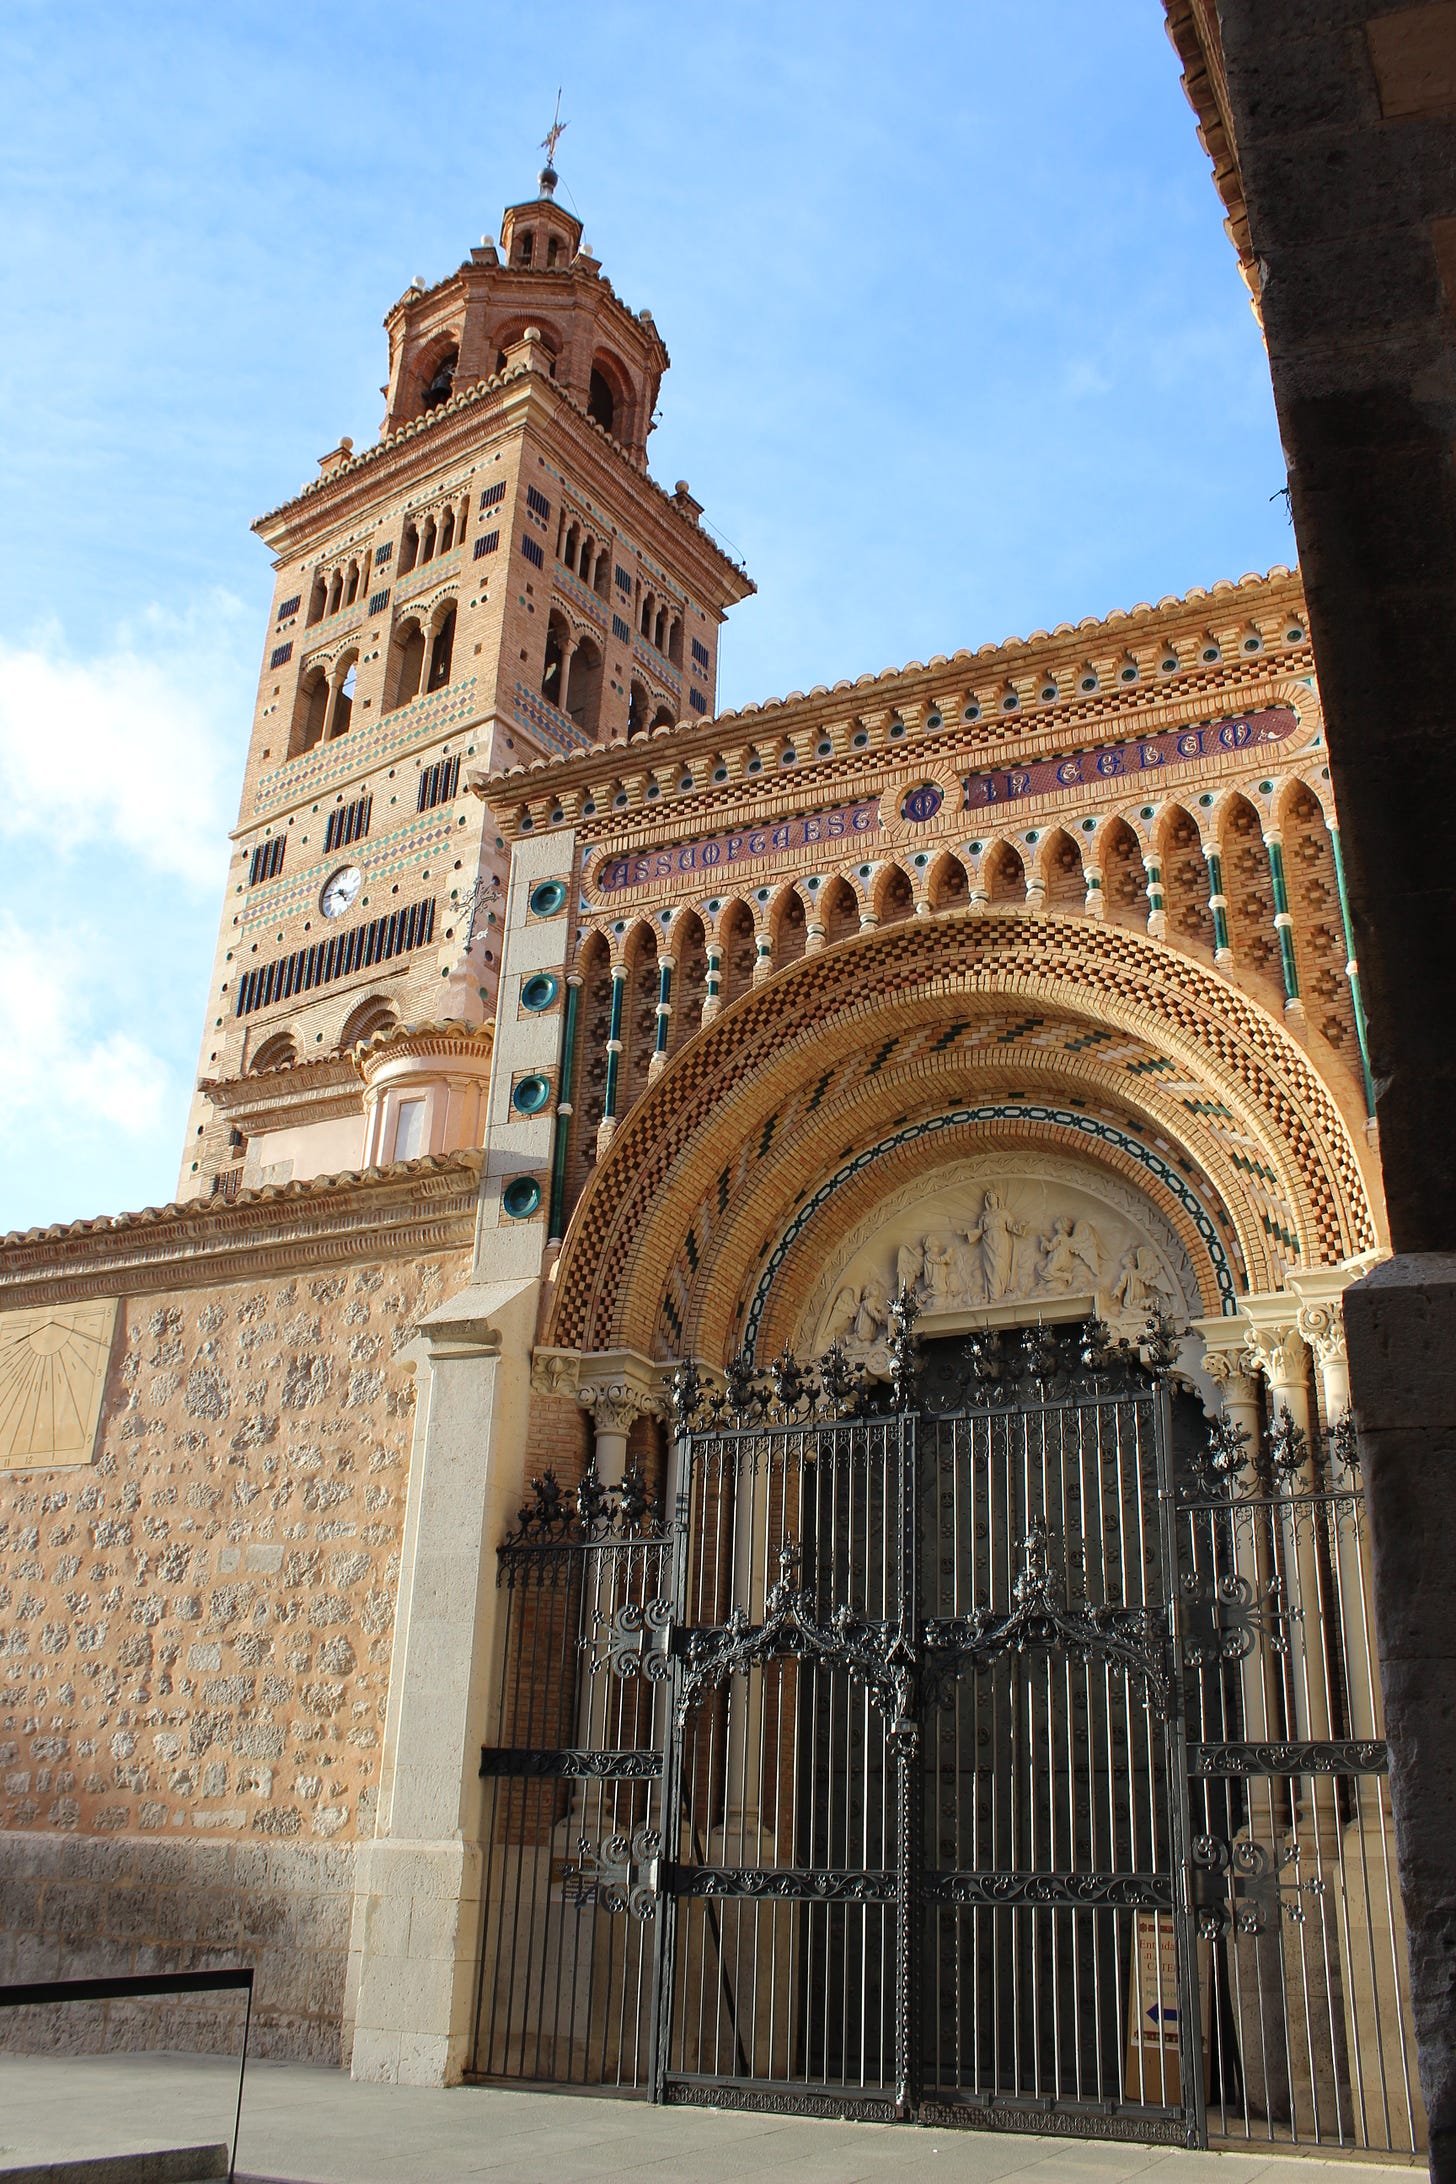 The cathedral is beautifully decorated in Mudéjar style.